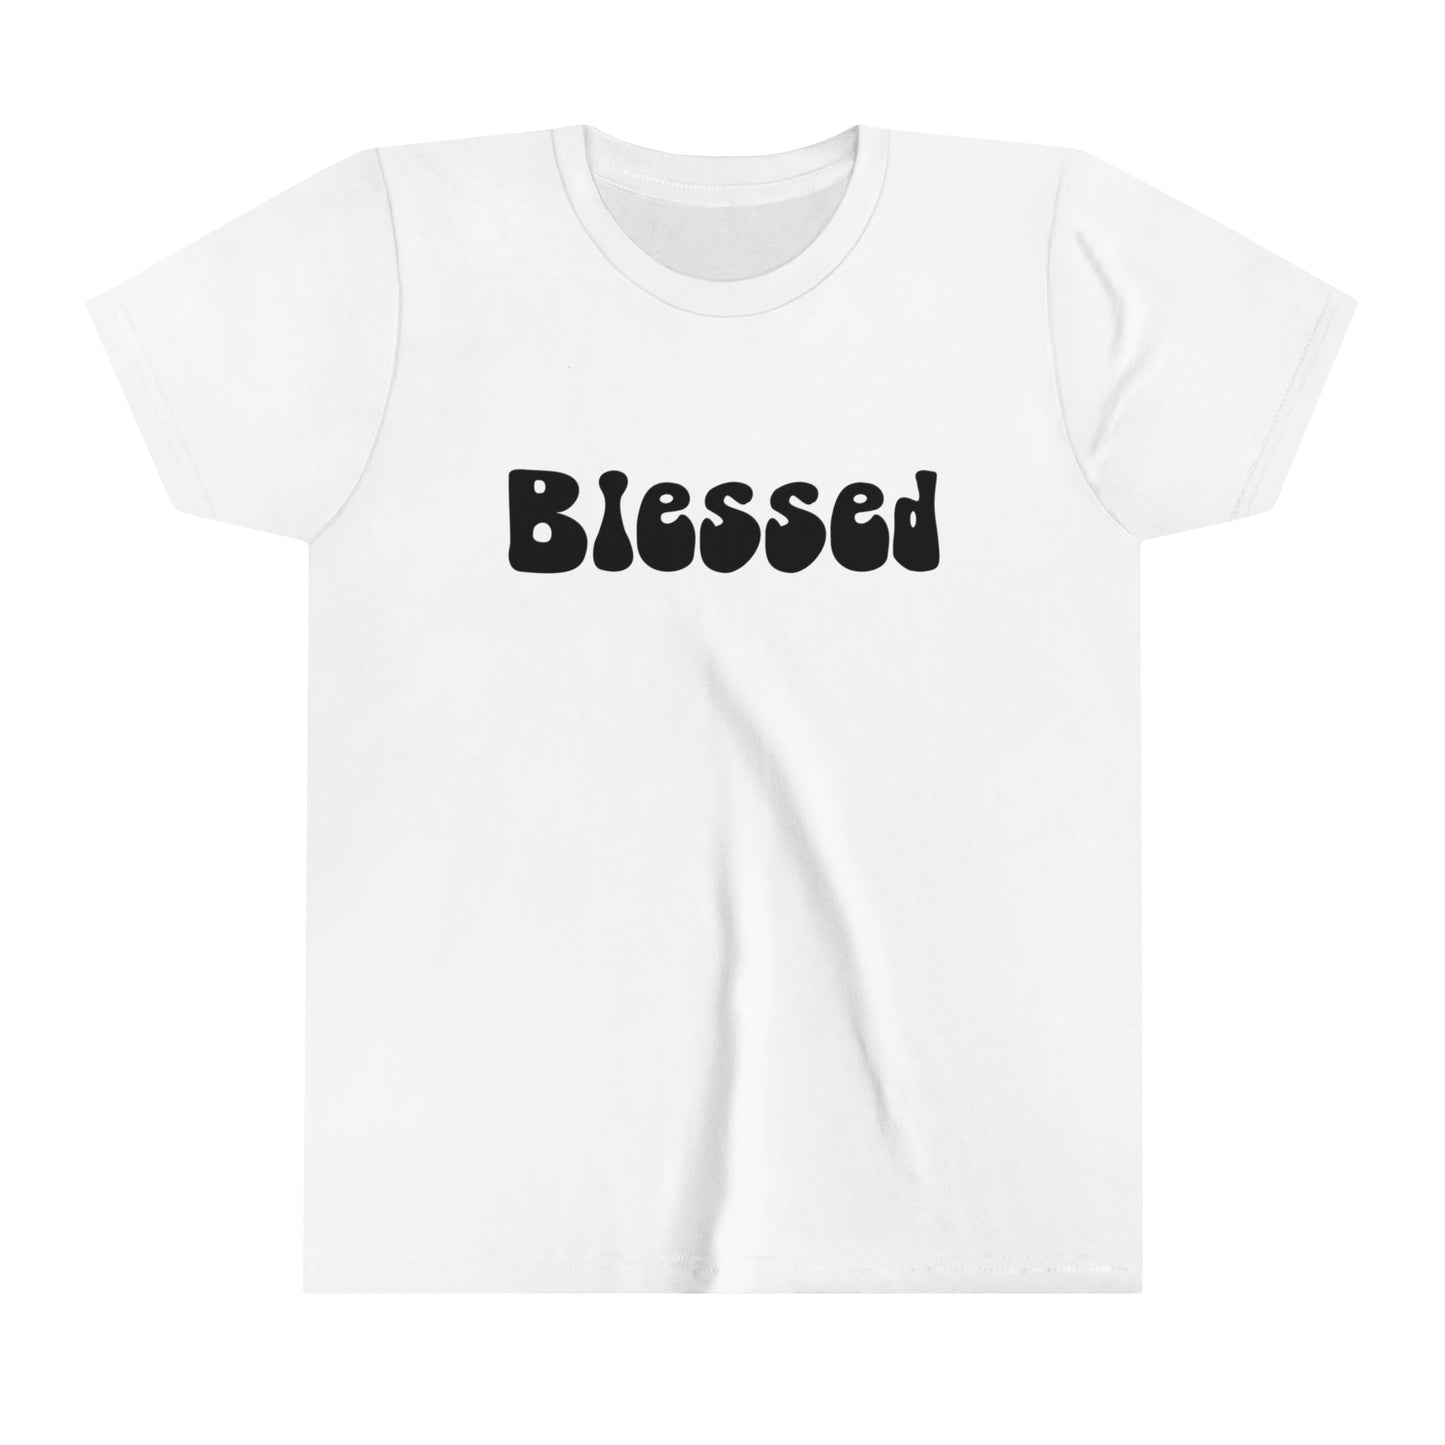 Groovy Blessed Black T-Shirt - Youth